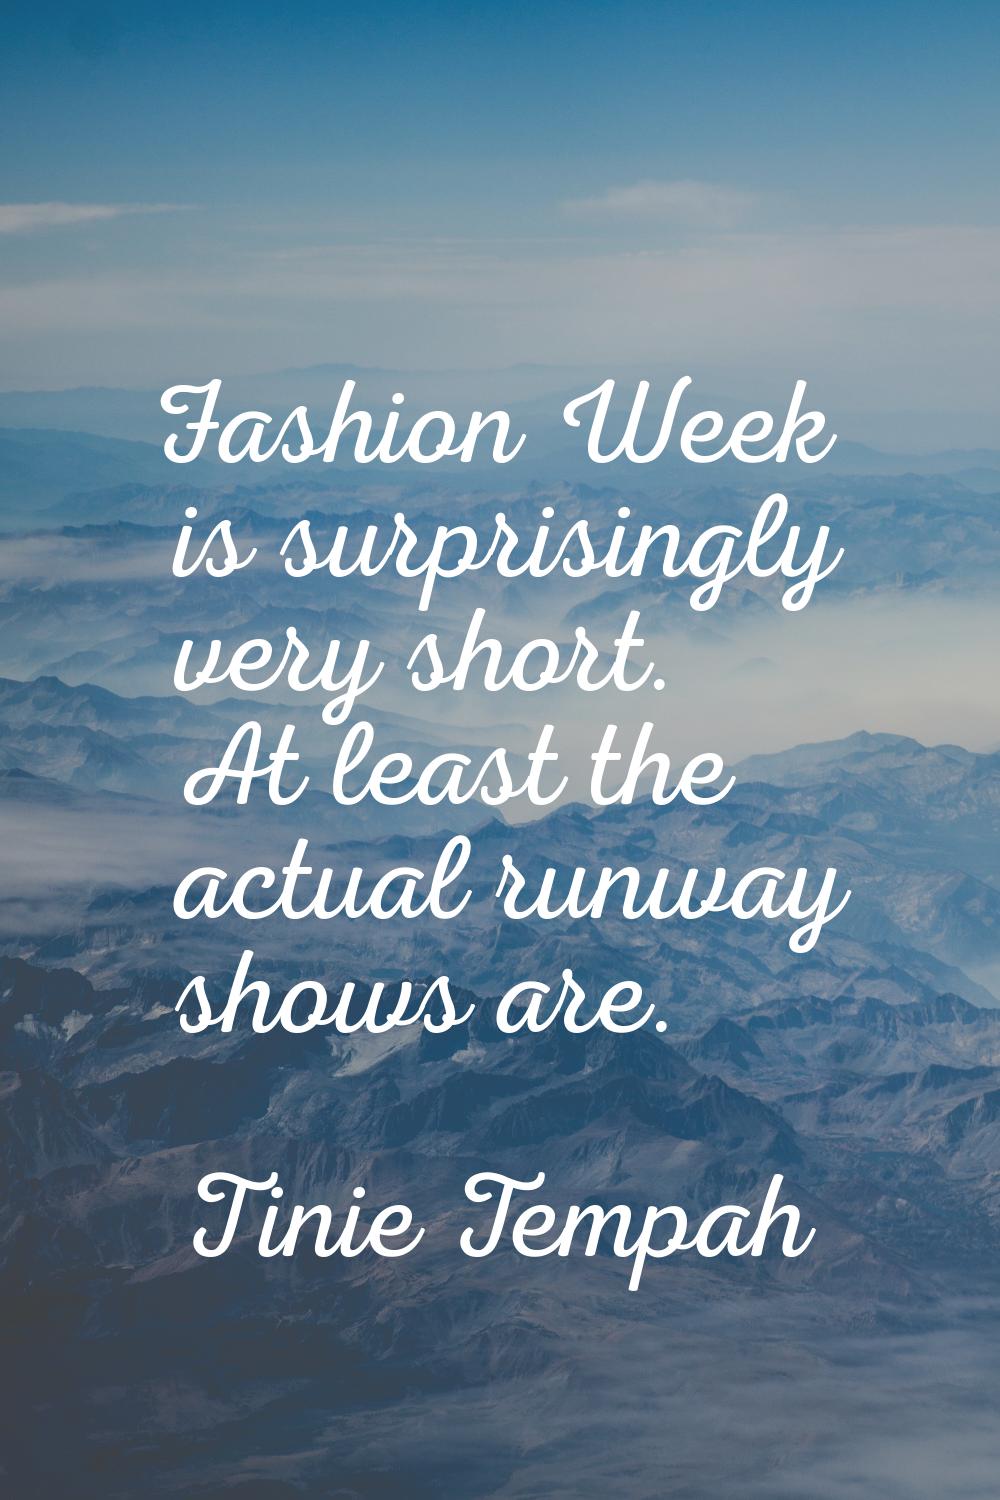 Fashion Week is surprisingly very short. At least the actual runway shows are.